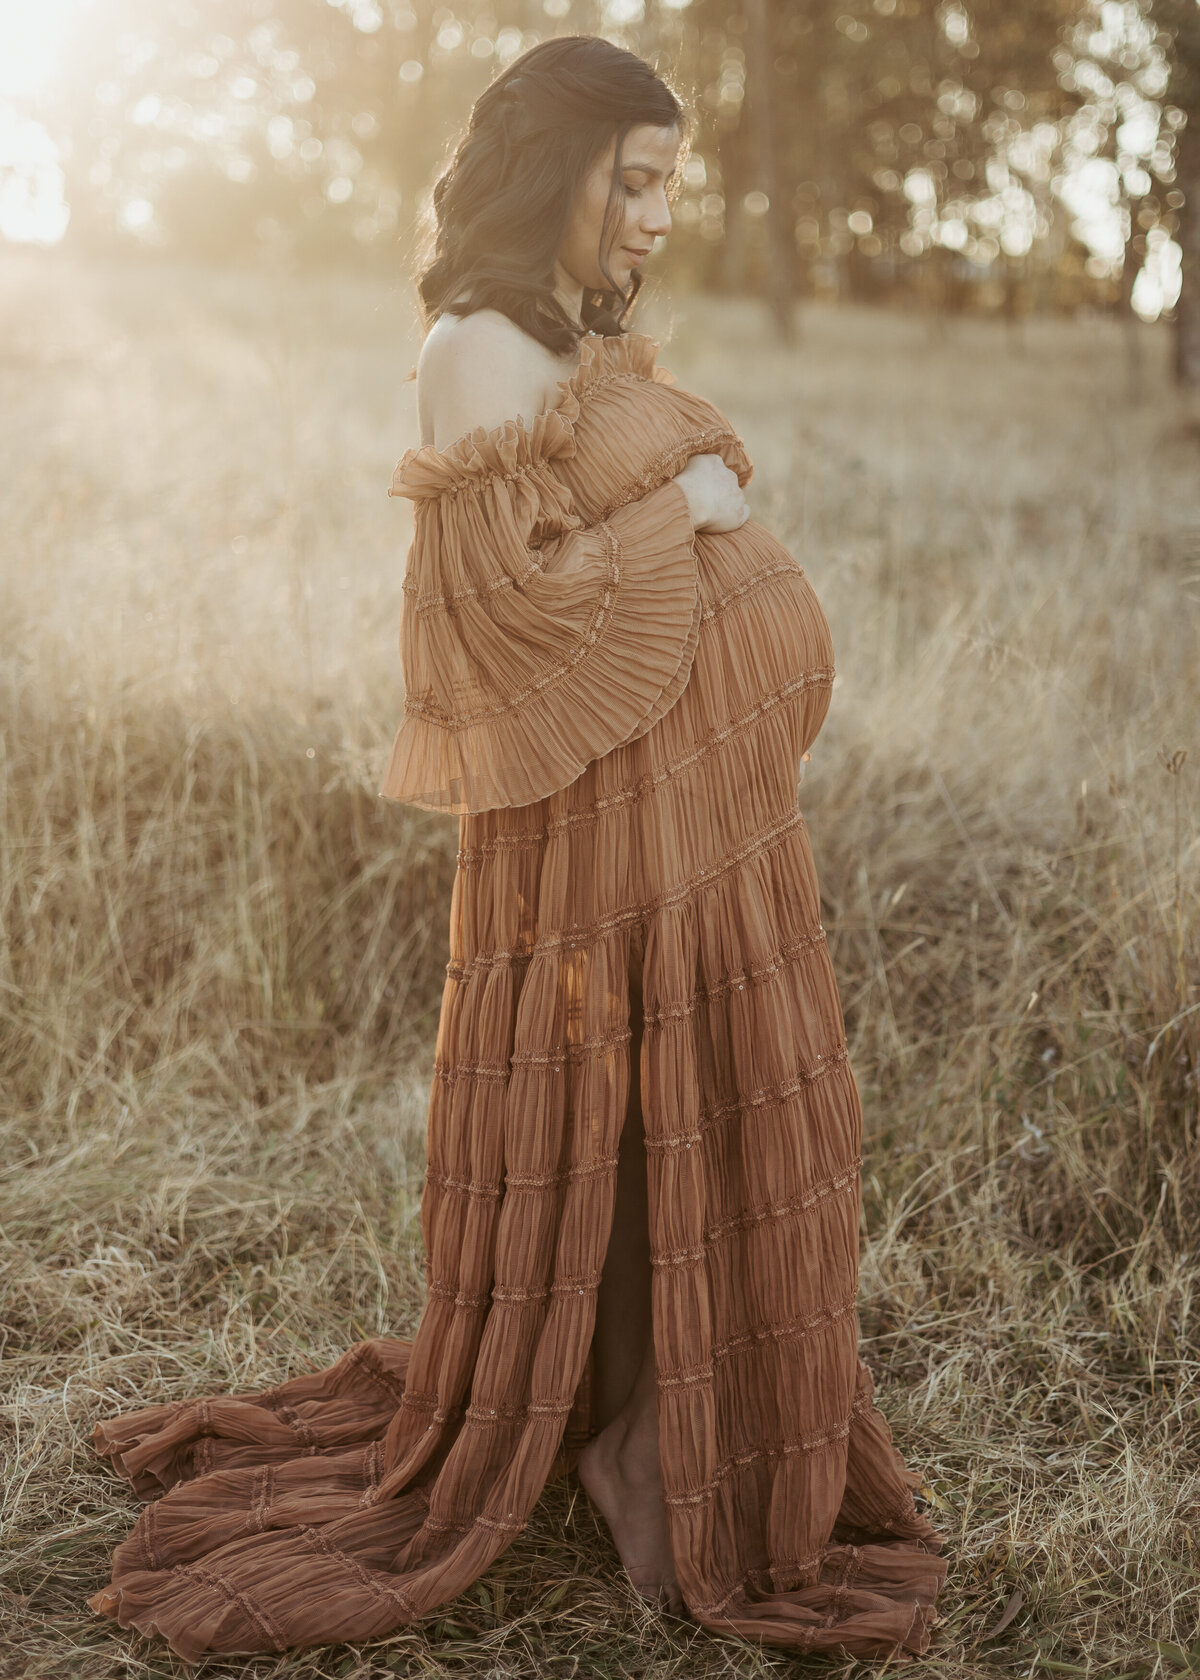 Gorgeous Sydney mama wearing a long brown strapless dress while gazing lovingly at her growing belly growing a baby for her maternity photoshoot.